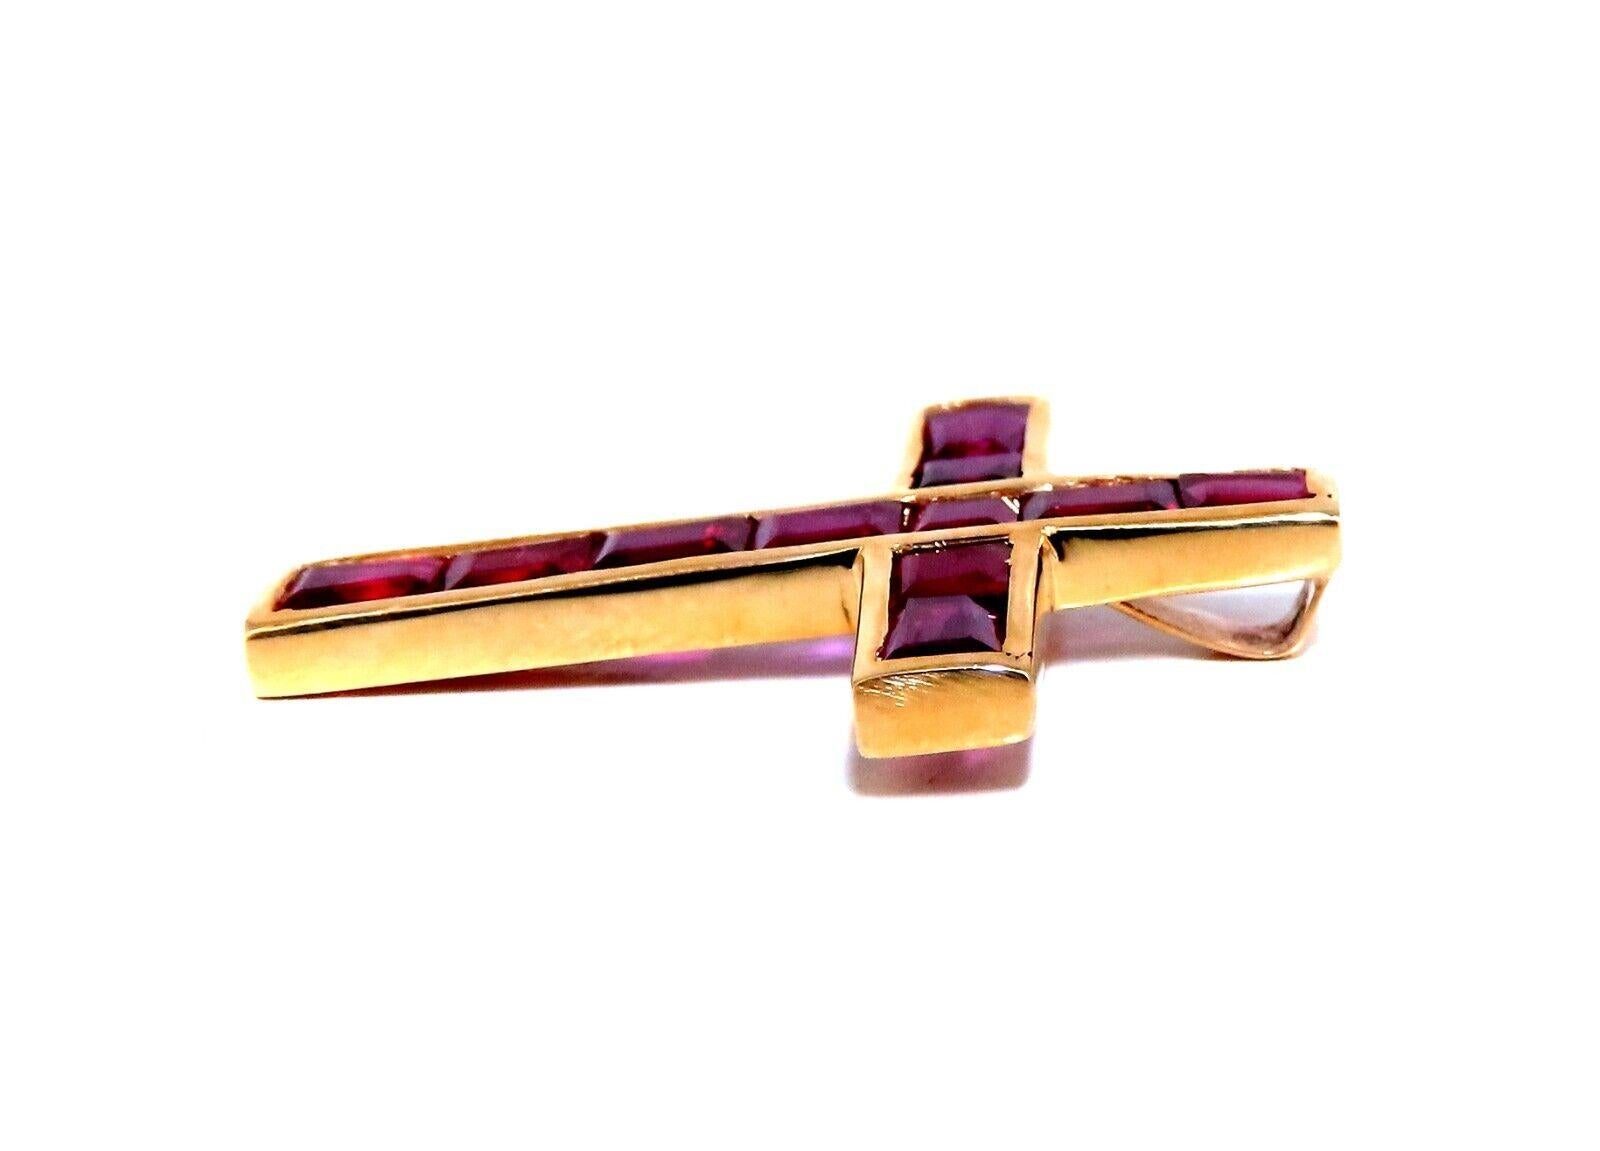 Natural Baguette Rubies Cross.

Natural 3.50ct Rubies

Brilliant Baguette, full cuts

clean clarity & transparent

Cross: 1.1 x .85 inch

total weight: 3.7 grams.

14kt yellow gold

$9000 appraisal to accompany